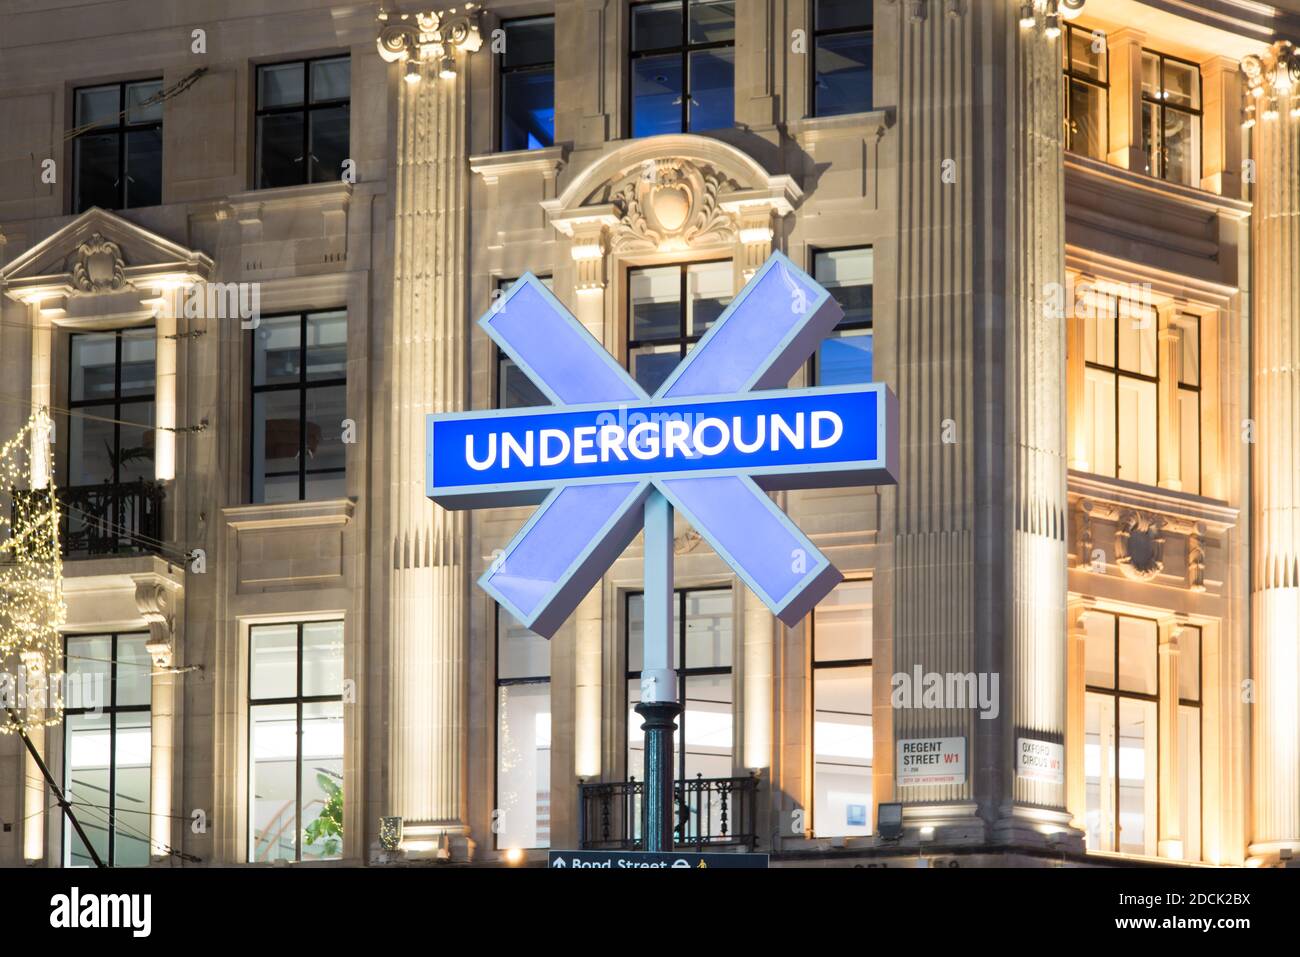 Sony PlayStation 5 PS5 Launch Underground Station Entrance Sign boutons icônes logo Night Neon Lights à Oxford Circus, West End, Londres, WC1 Banque D'Images